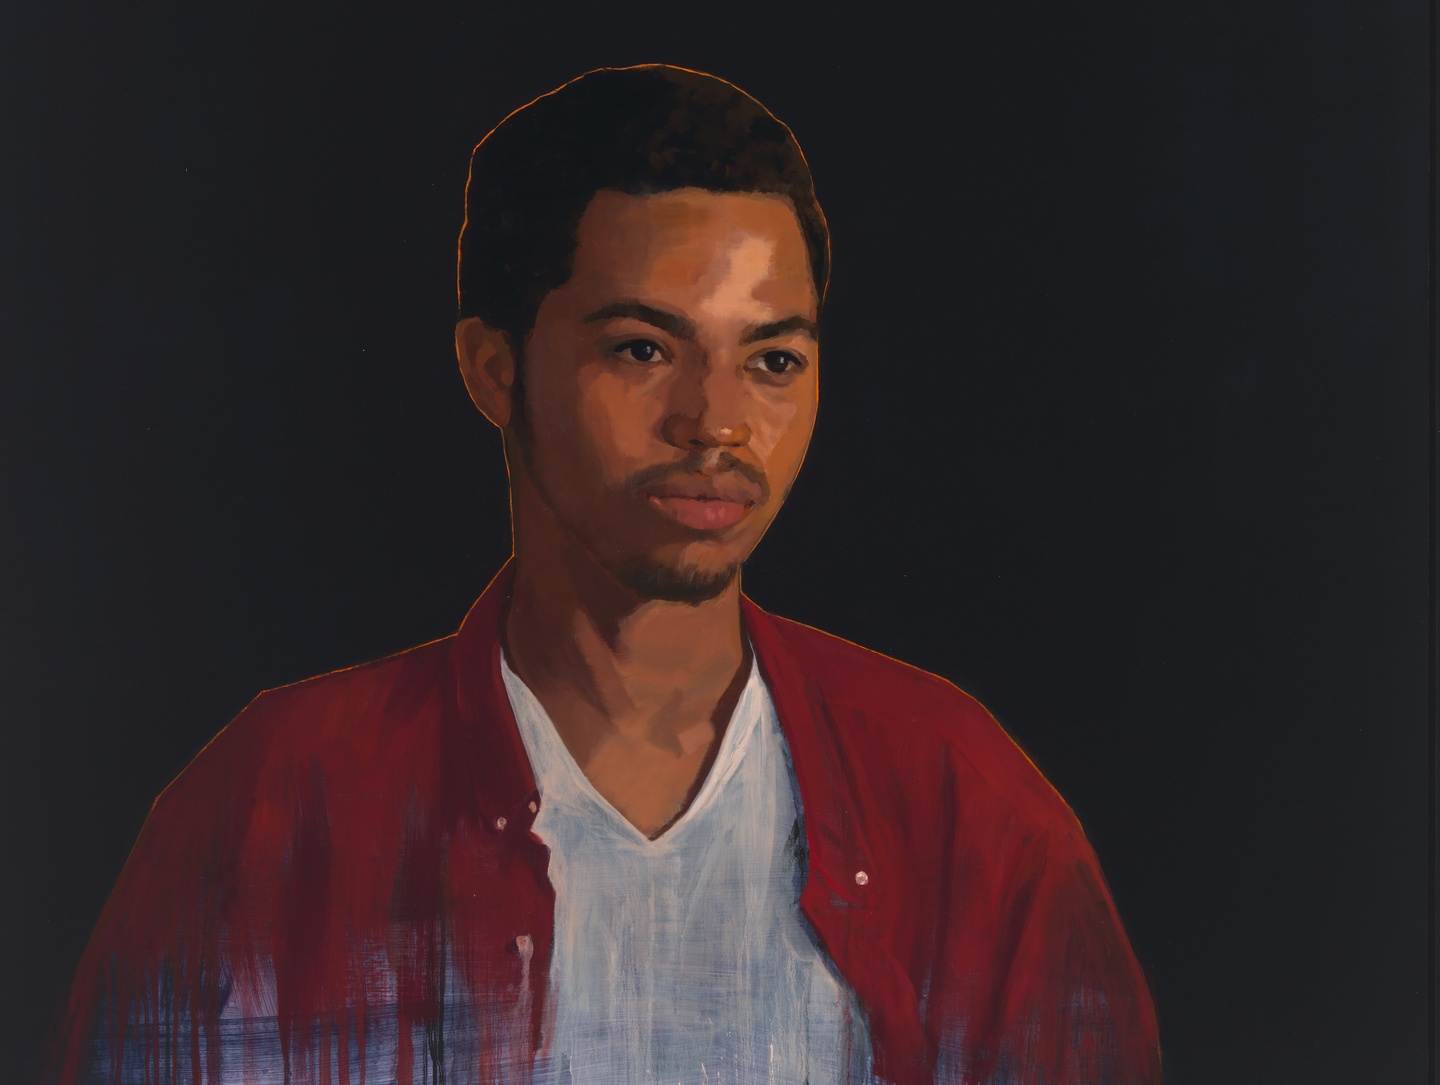 Portrait of a young man against a dark background